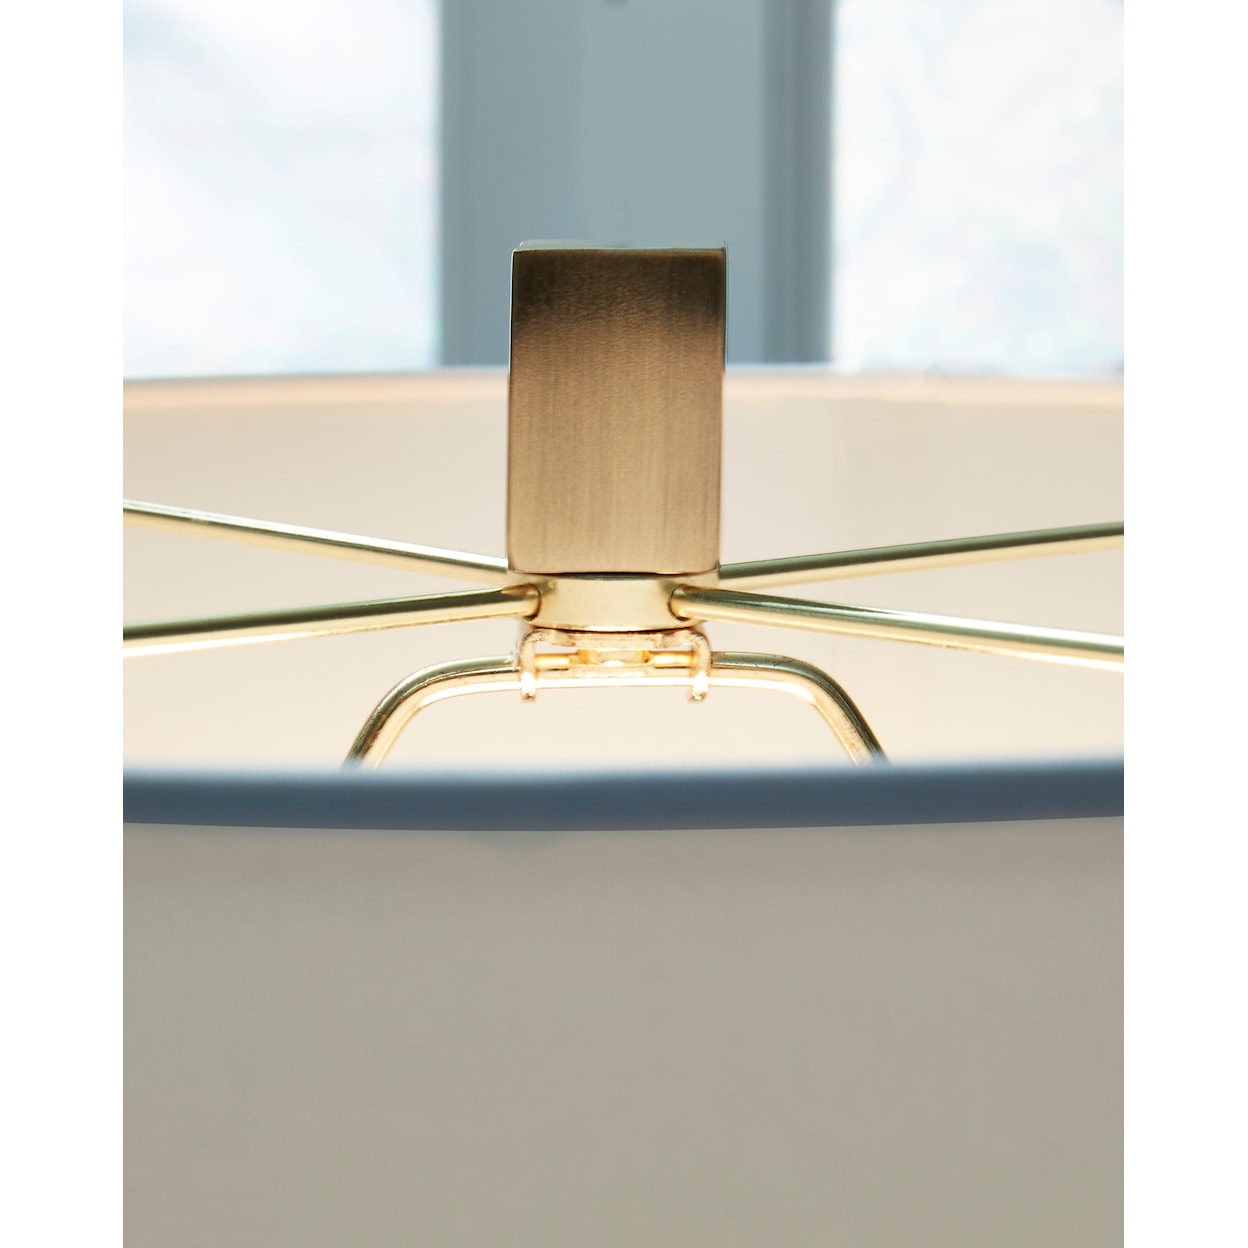 Signature Design by Ashley Lamps - Contemporary Teelsen Clear/Gold Finish Table Lamp